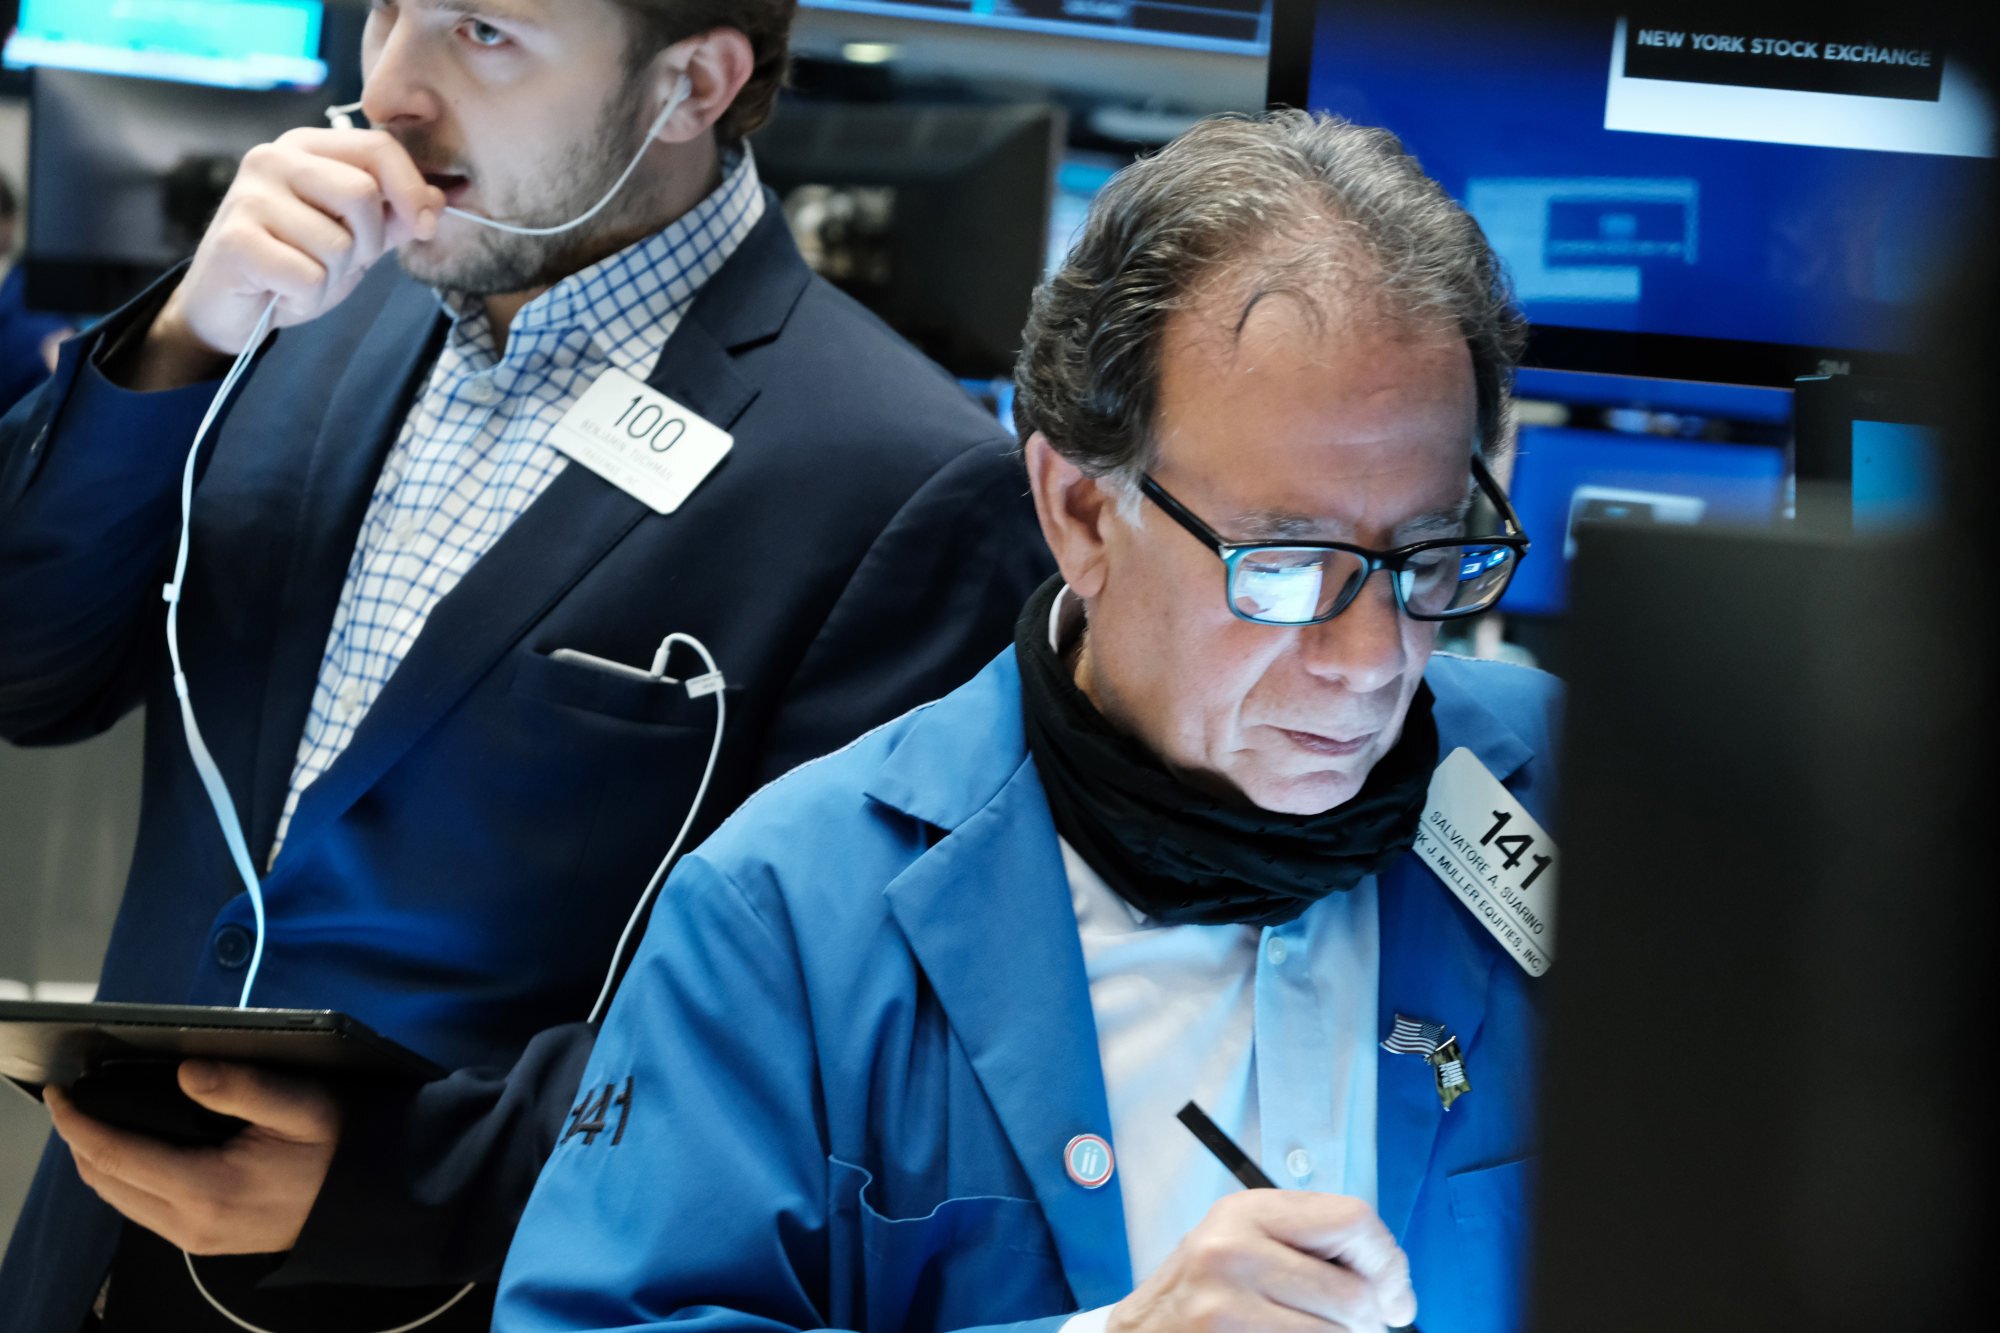 Traders on the floor of the New York Stock Exchange. Reporting on financial markets tends towards extremes. Photo: Getty Images